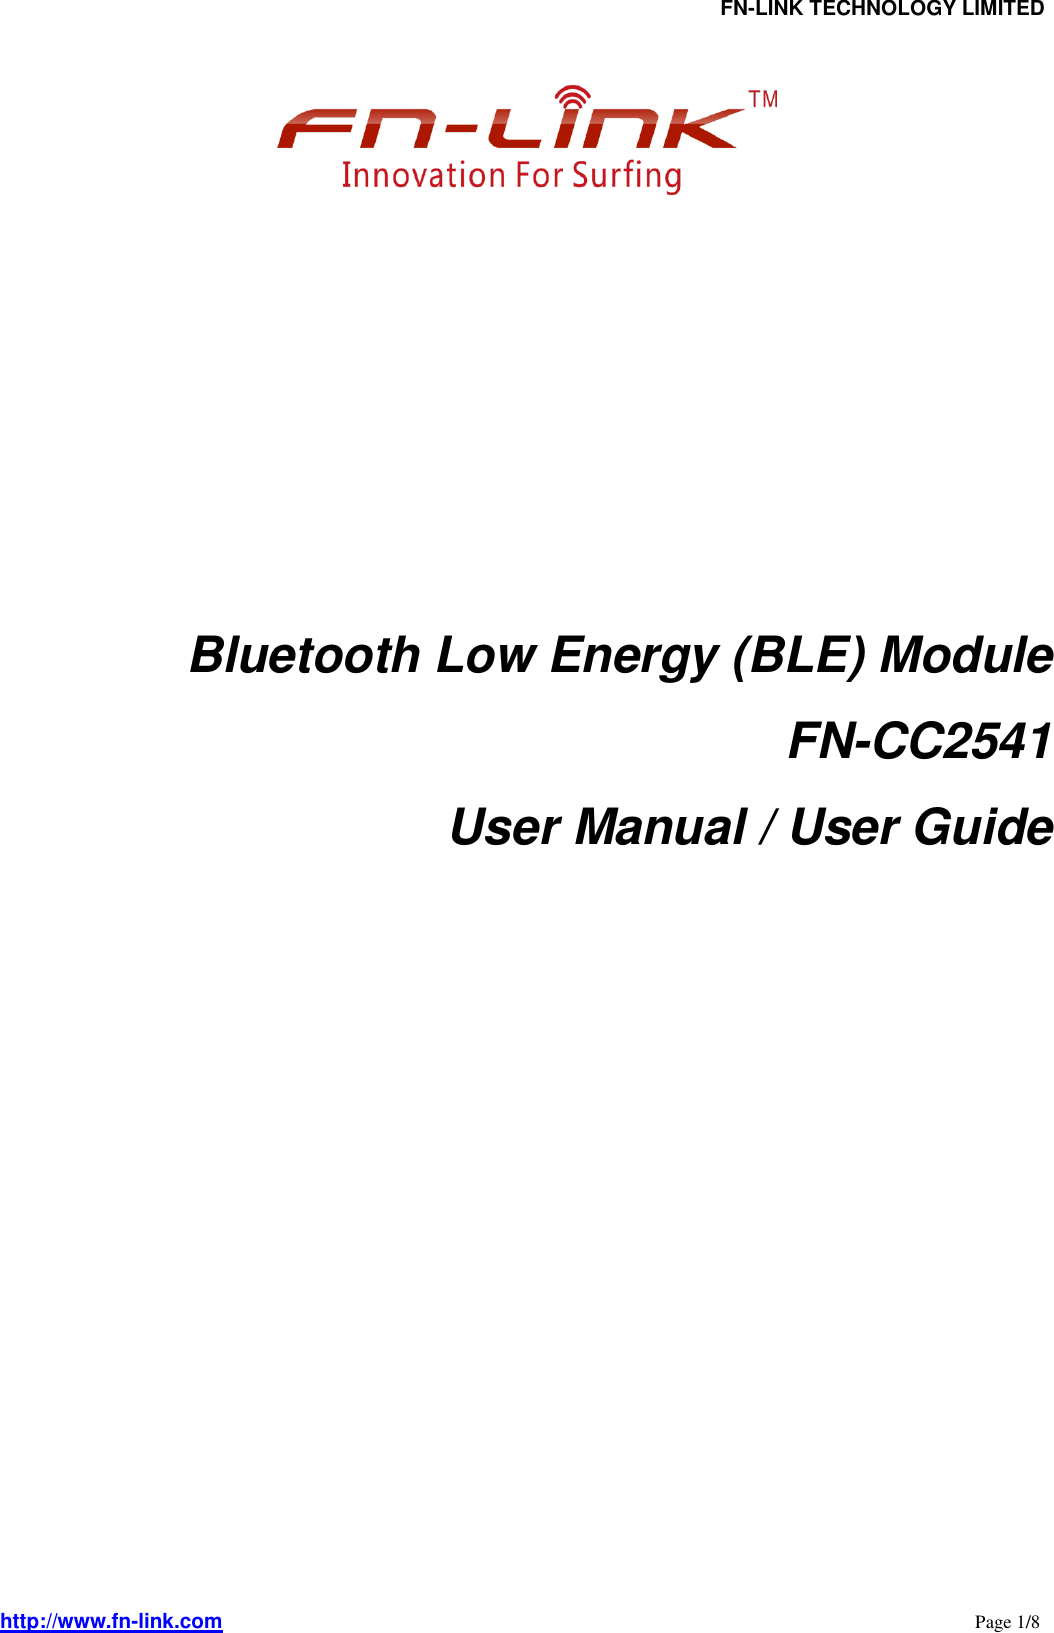                                FN-LINK TECHNOLOGY LIMITED http://www.fn-link.com                                                                                                                      Page 1/8               Bluetooth Low Energy (BLE) Module FN-CC2541 User Manual / User Guide                           